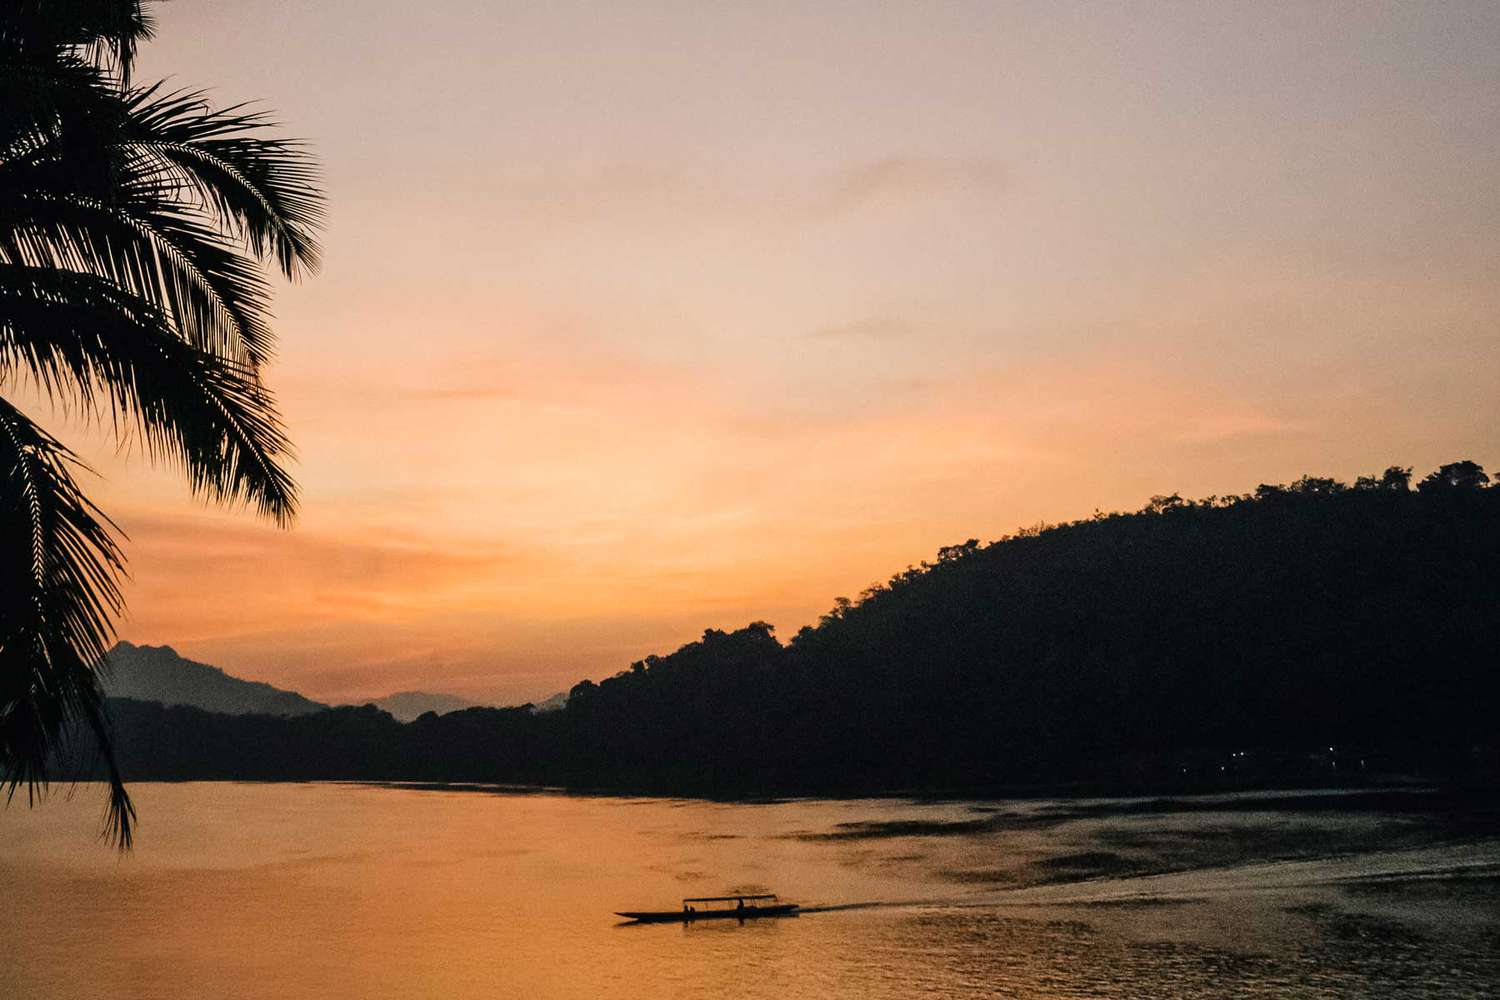 A Luxury River Cruise Down the Mekong Is the Best Way to See Laos